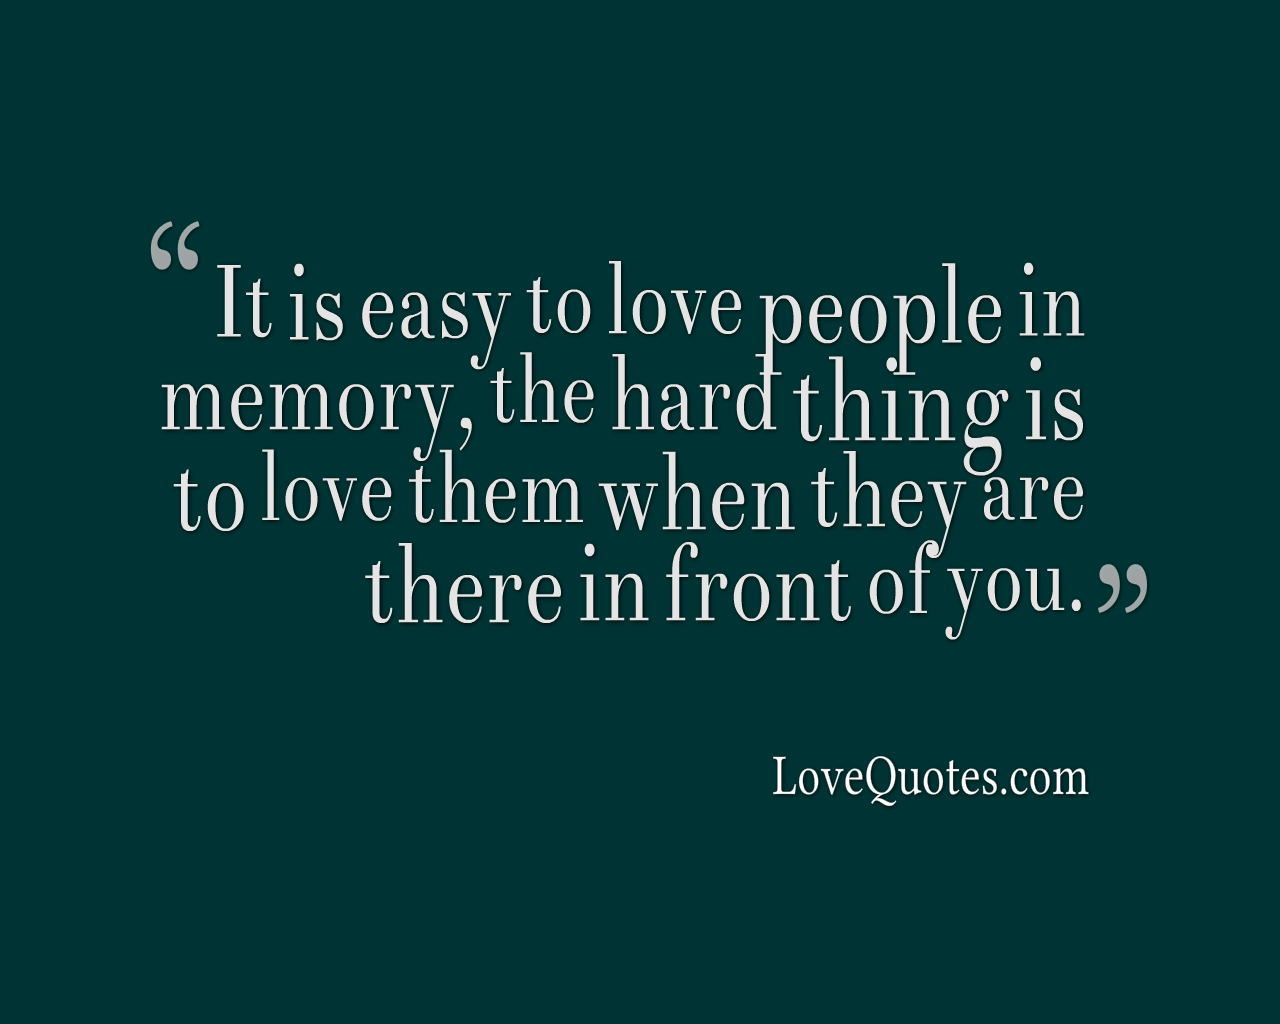 To Love People